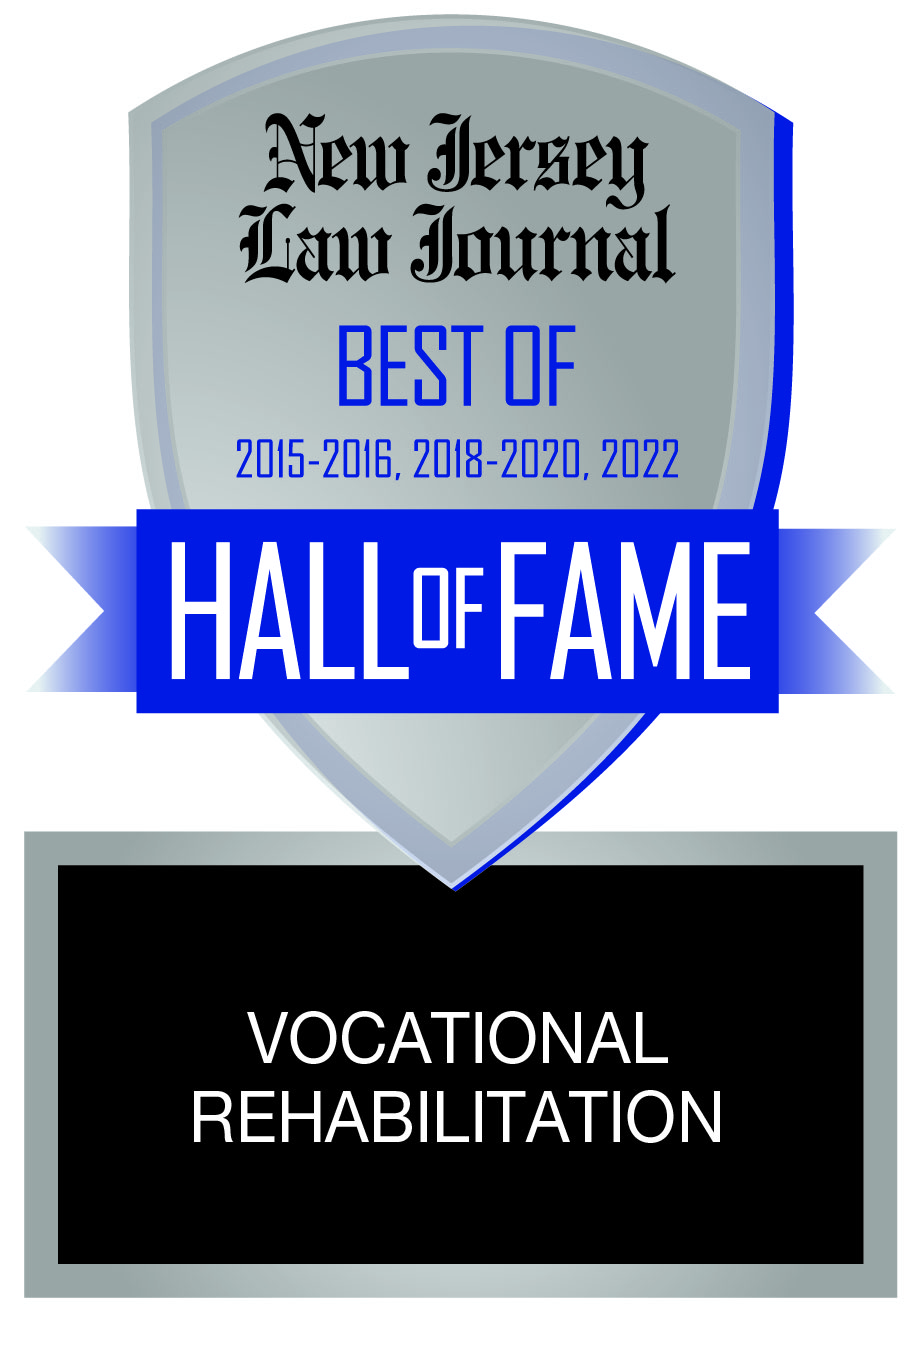 New Jersey Law Journal - Vocal Rehabilitation Hall of Fame 2022